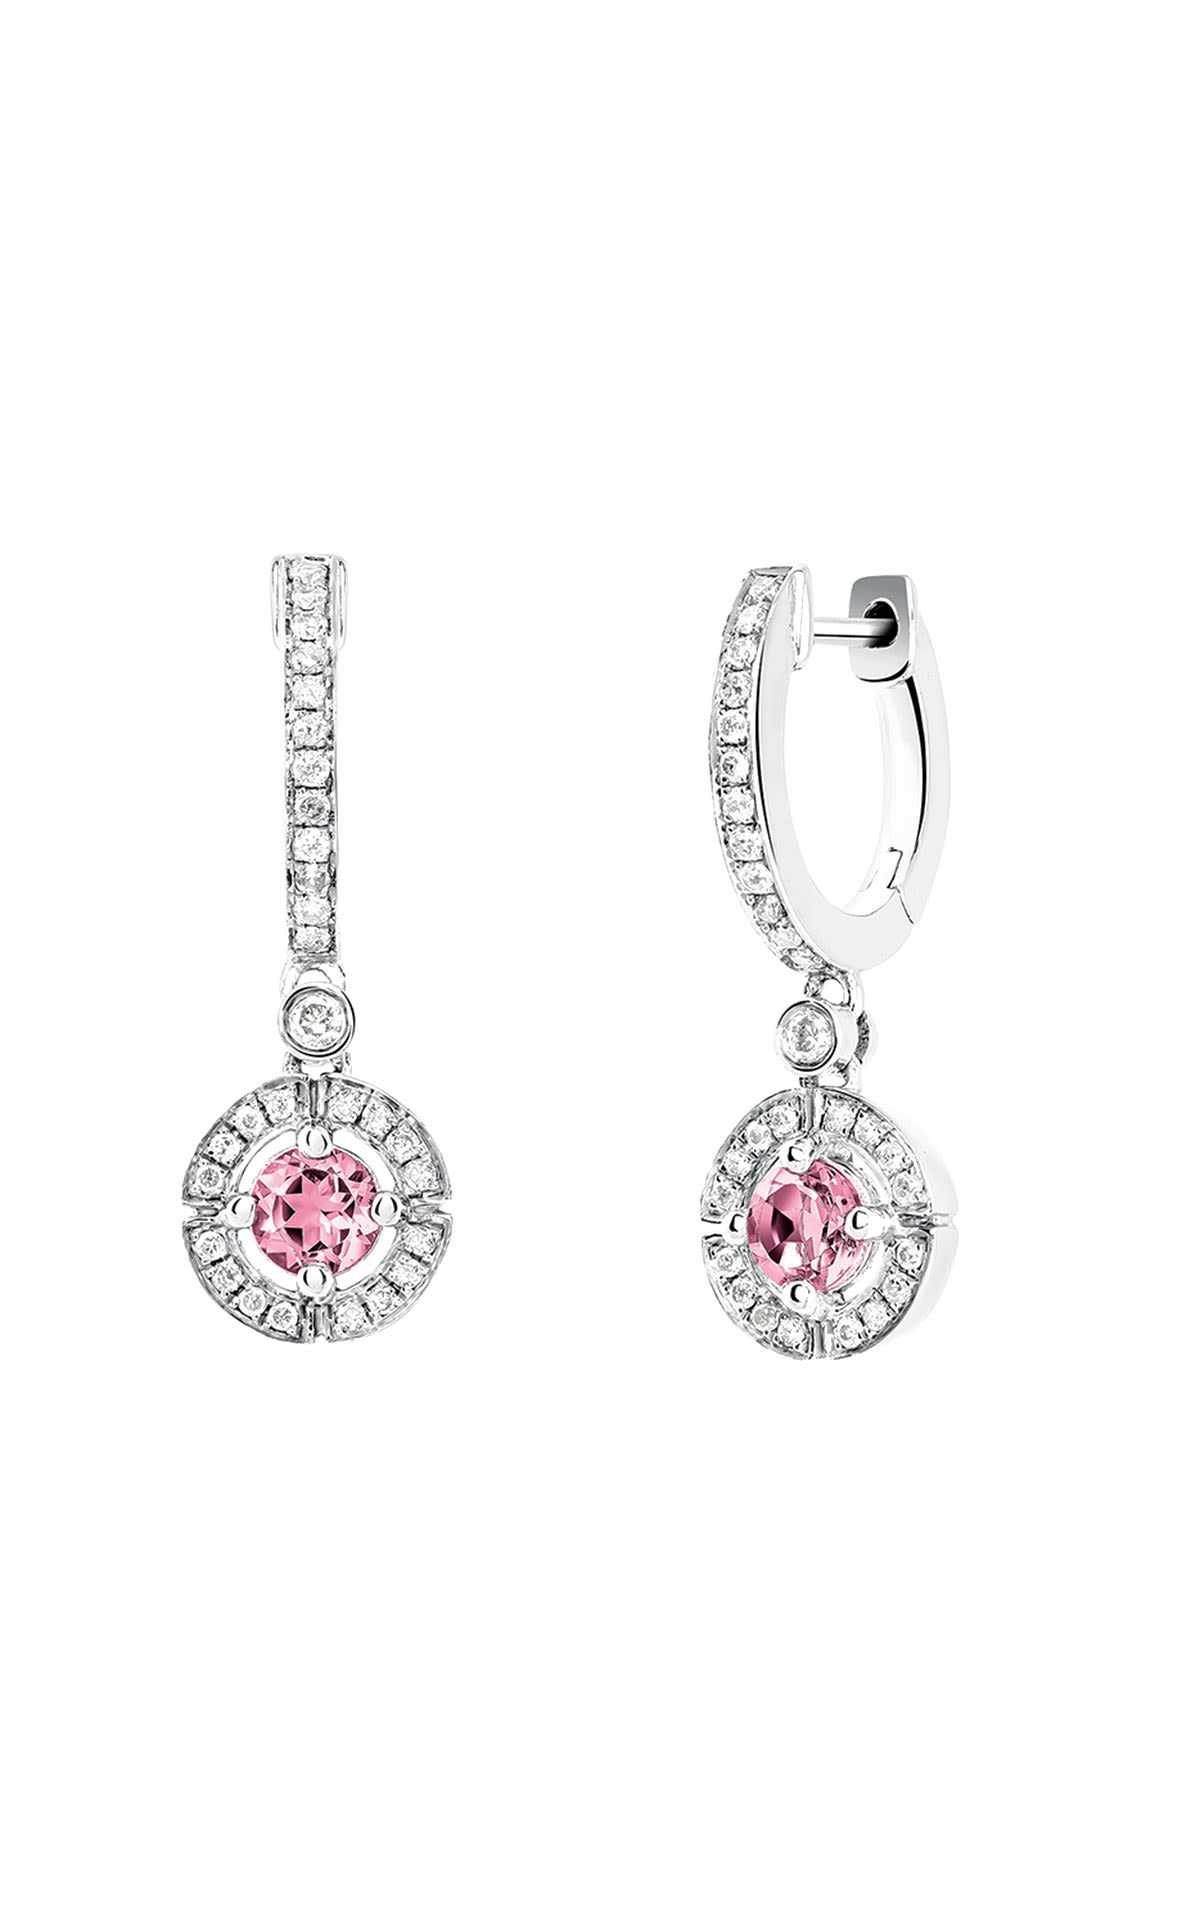 Long diamond earrings with pink stone Aristocrazy